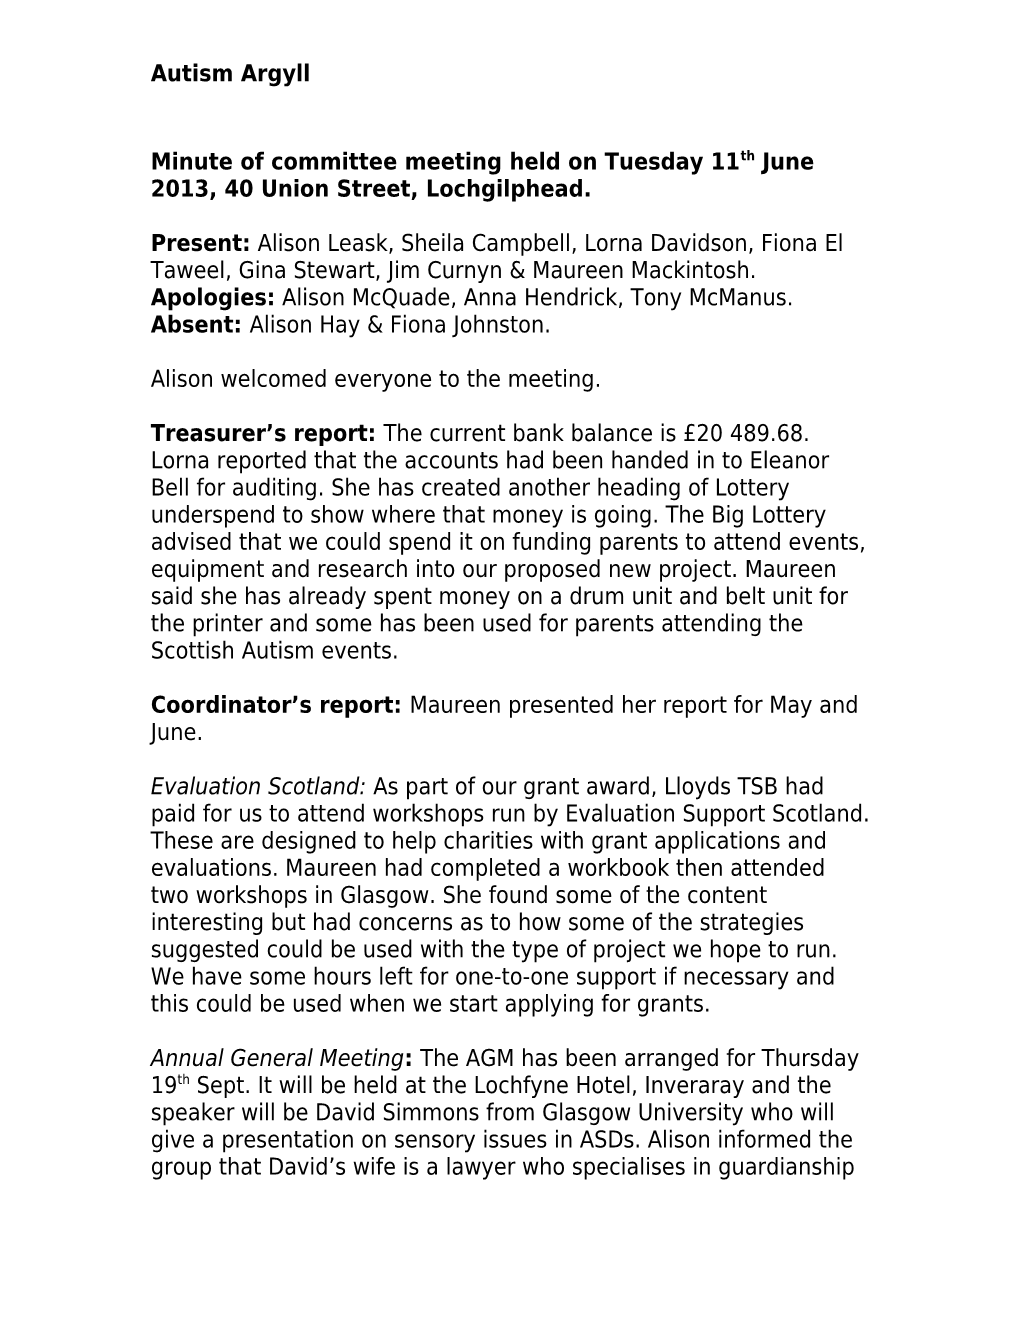 Minute of Committee Meeting Held on Tuesday 11Th June 2013, 40 Union Street, Lochgilphead